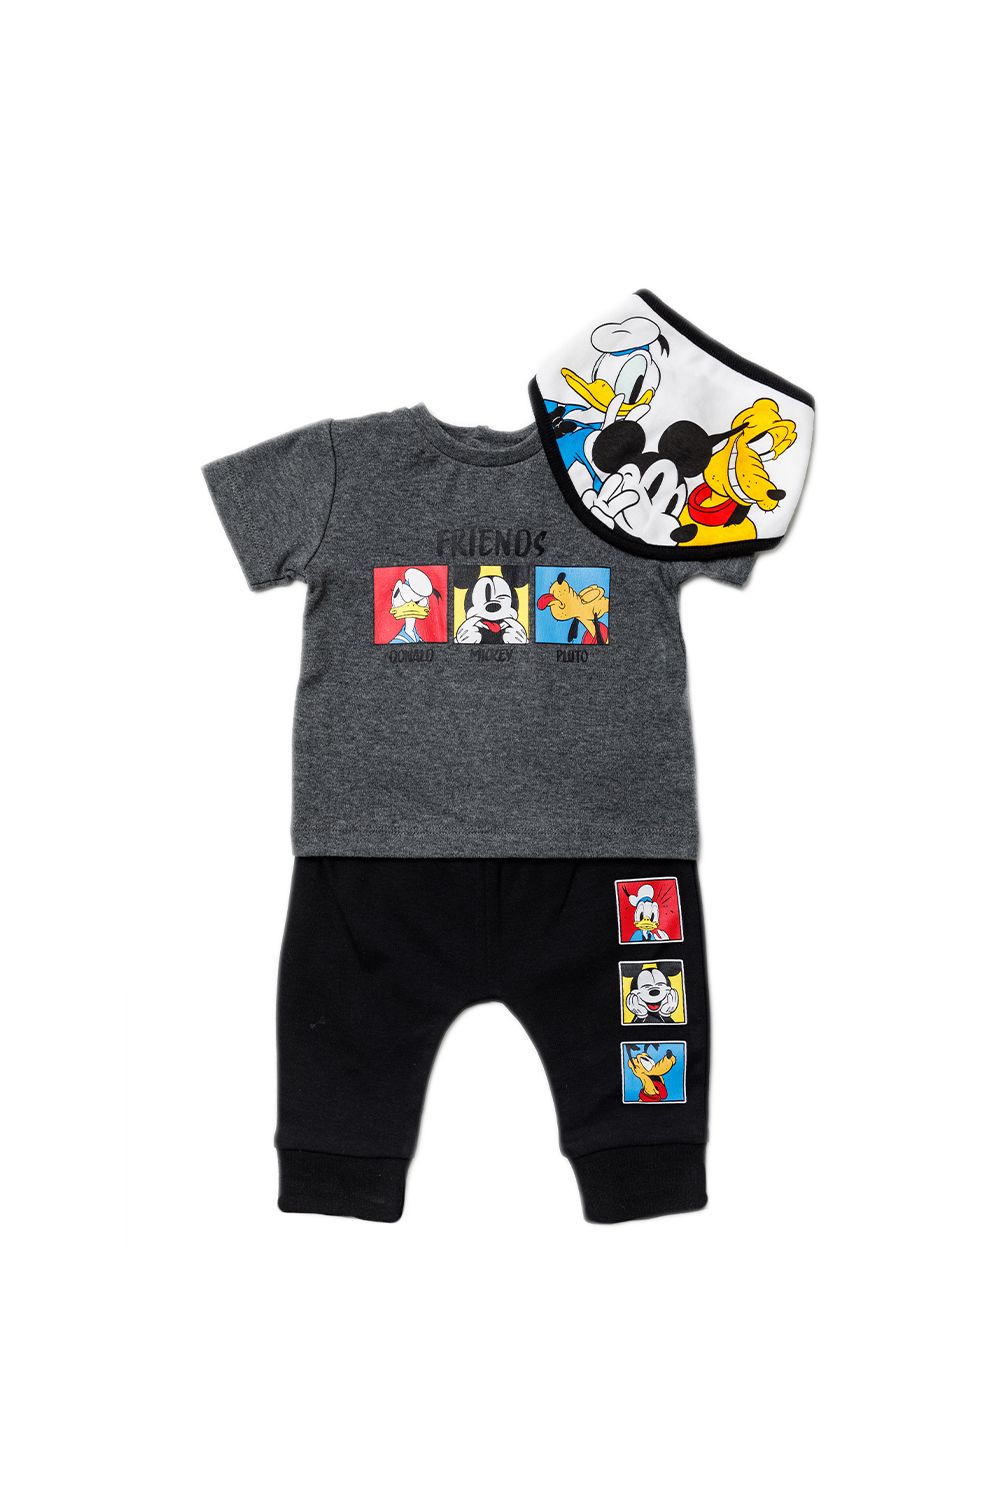 This adorable Disney Baby three-piece set features a funky Mickey Mouse and friends print. The set includes a printed t-shirt, a pair of shorts and a matching bib! The t-shirt, shorts and bib are all cotton, keeping your little one comfortable. Along with Mickey, the set features Donald and Pluto! This set would make a lovely gift or a new addition to your little ones wardrobe!